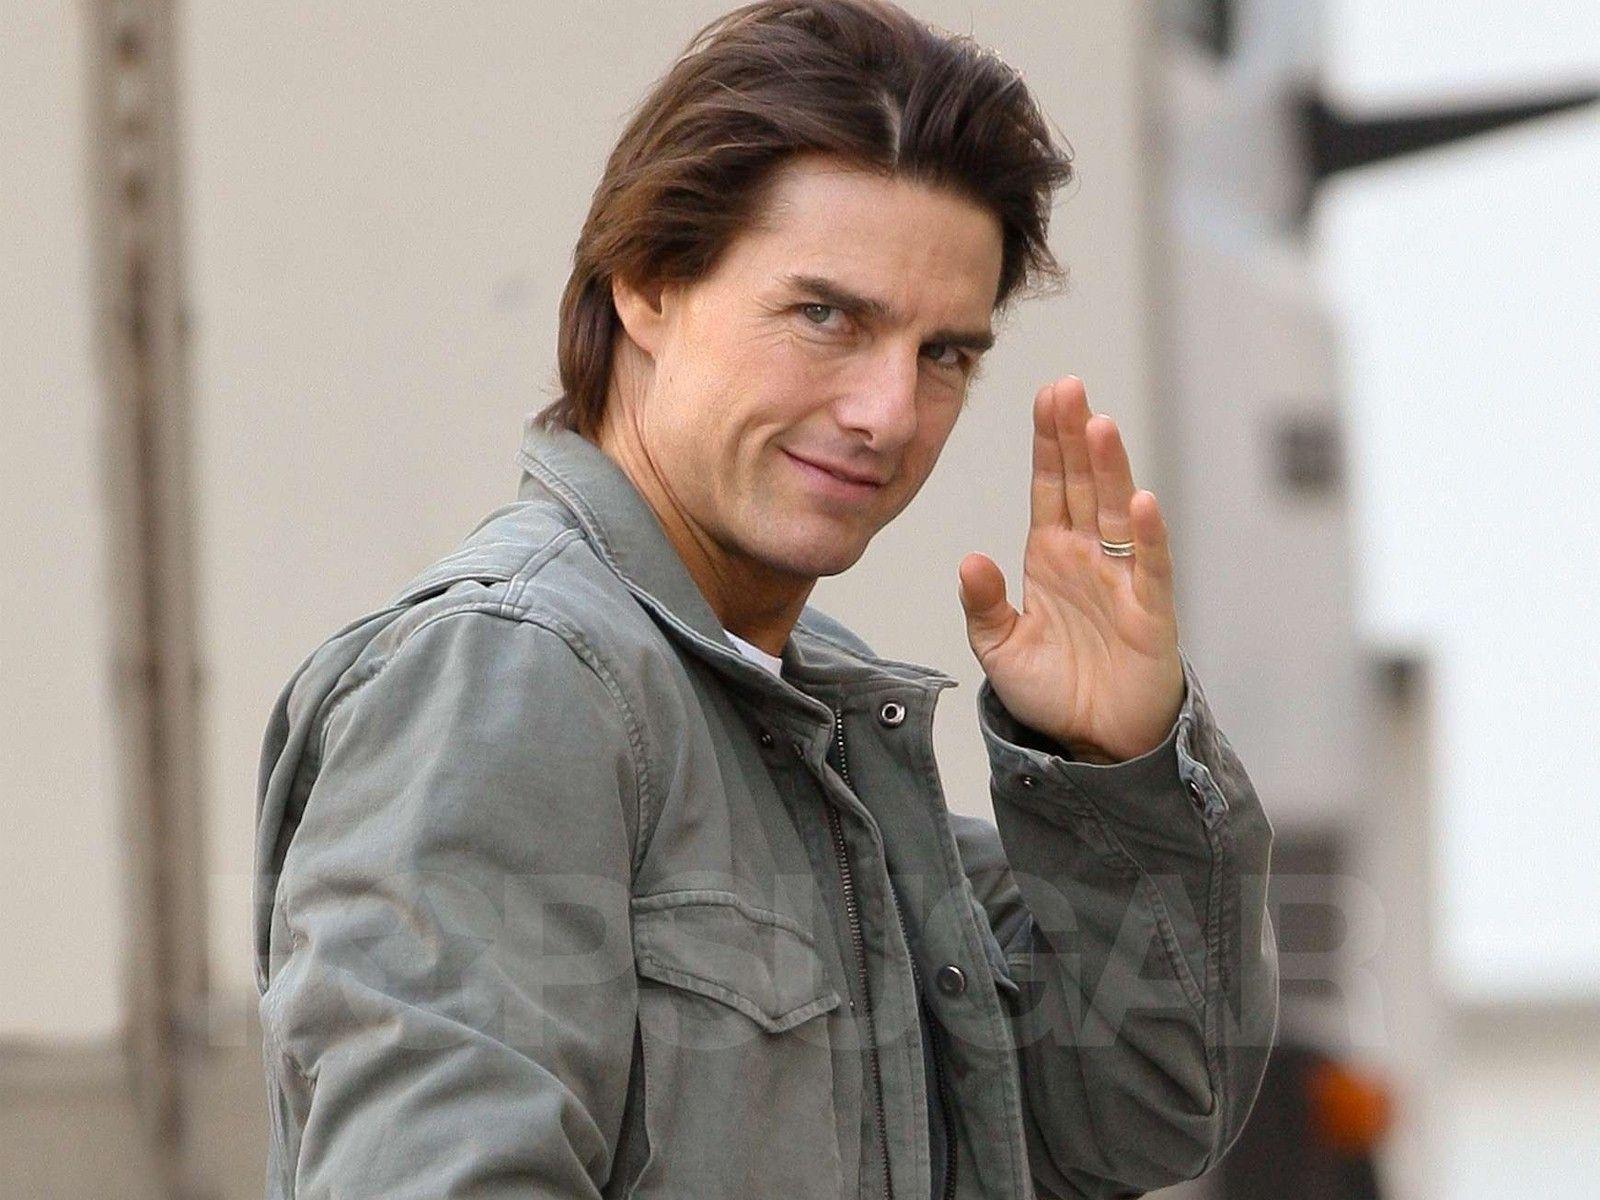 Tom Cruise HD Photo. Movie Celebrity Actor Wallpaper Image